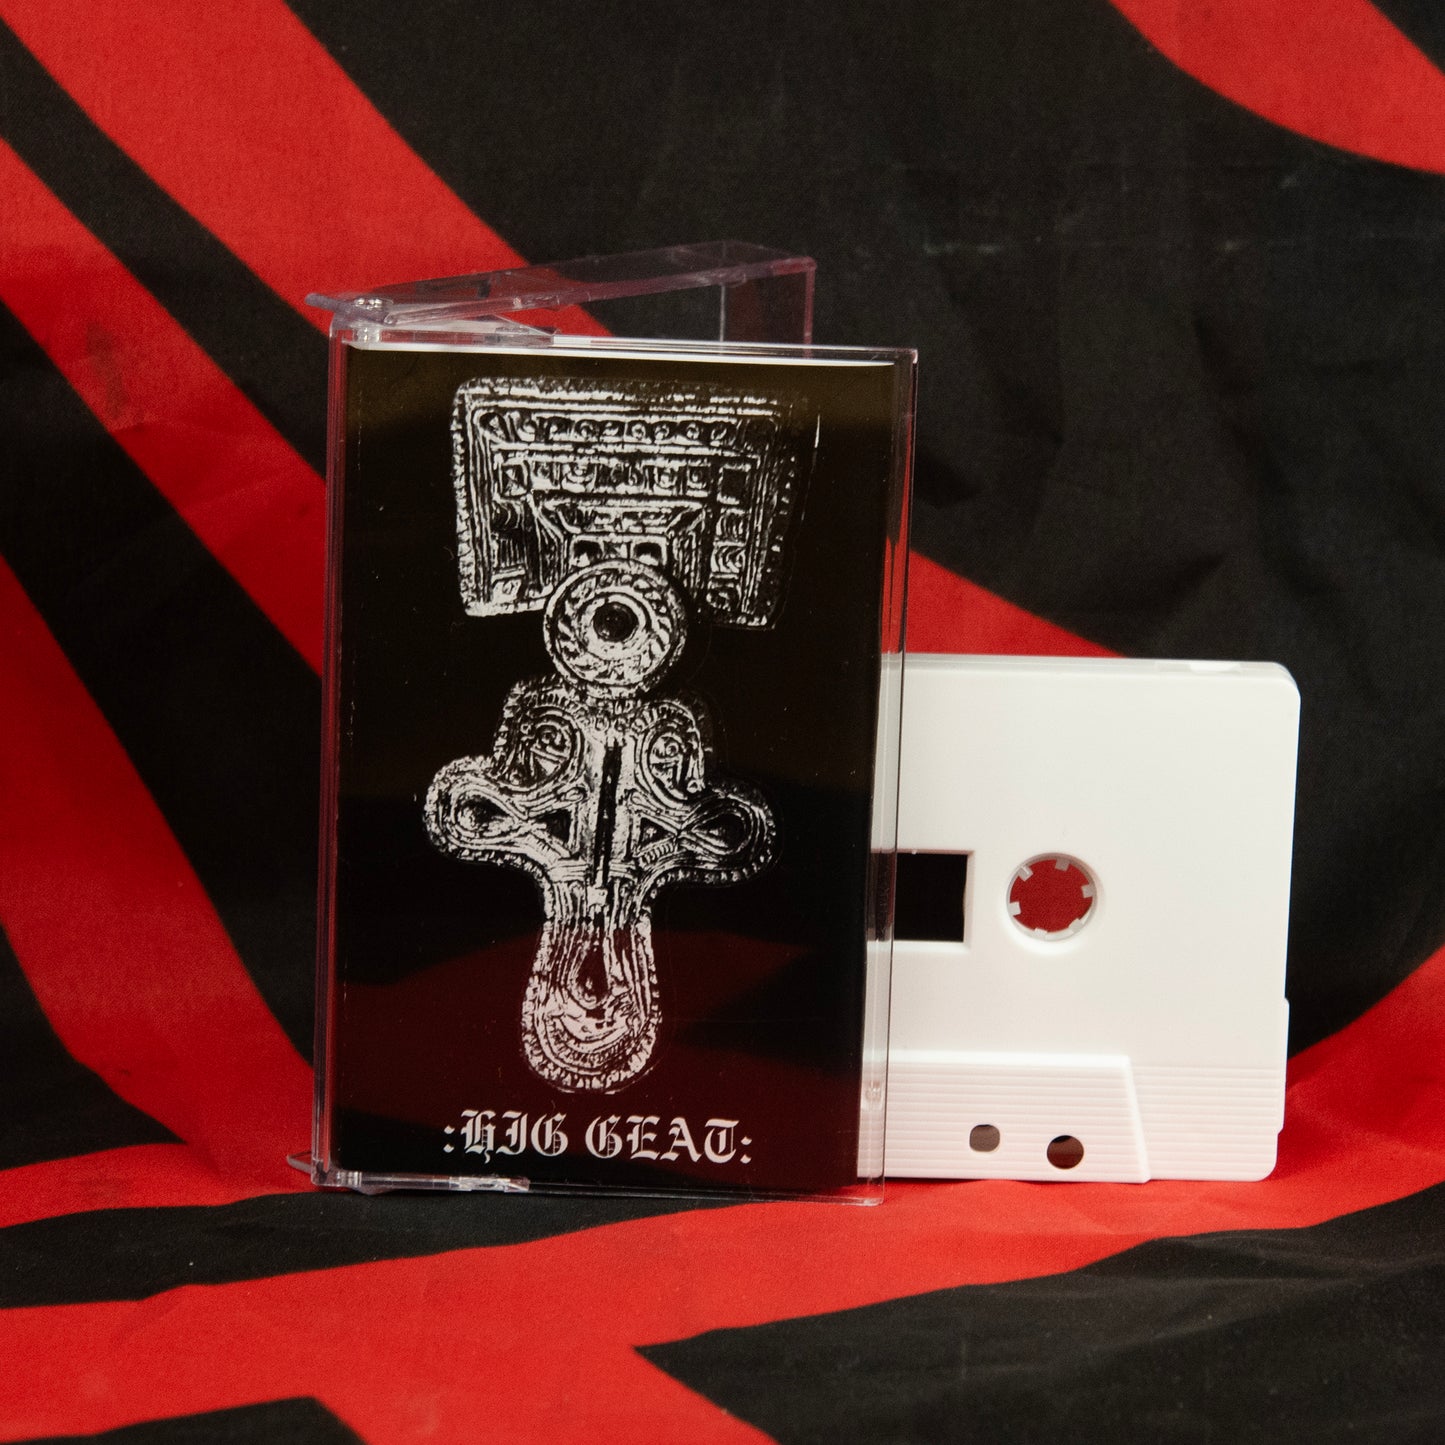 Hig Geat - “S/T” Tape